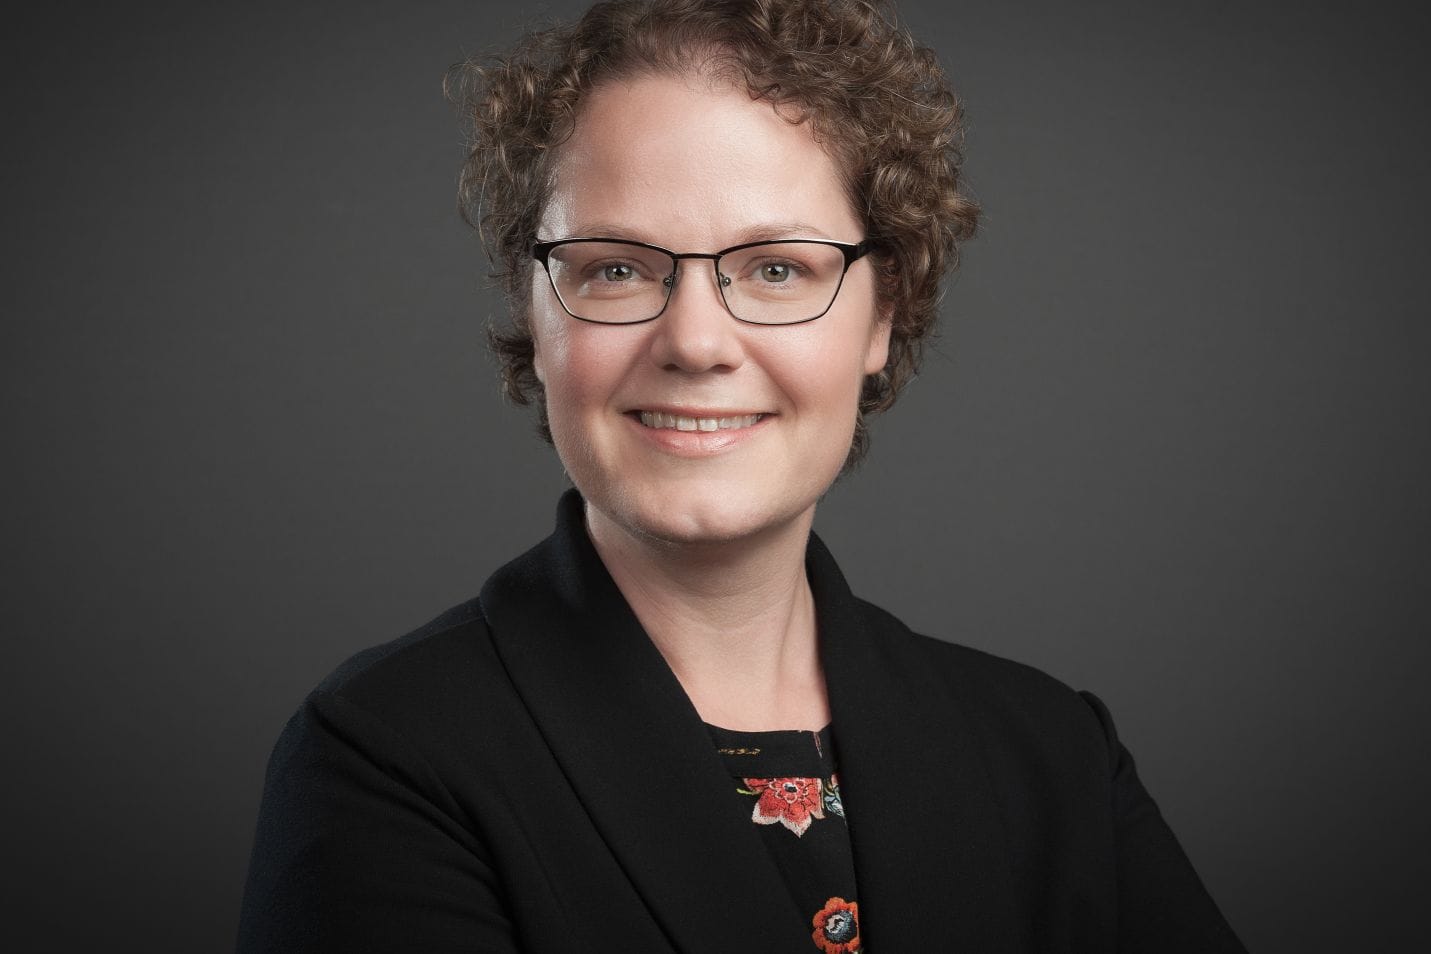 Professional headshot of a woman with curly hair wearing glasses, a black blazer, and a floral pin, smiling against a gray background.